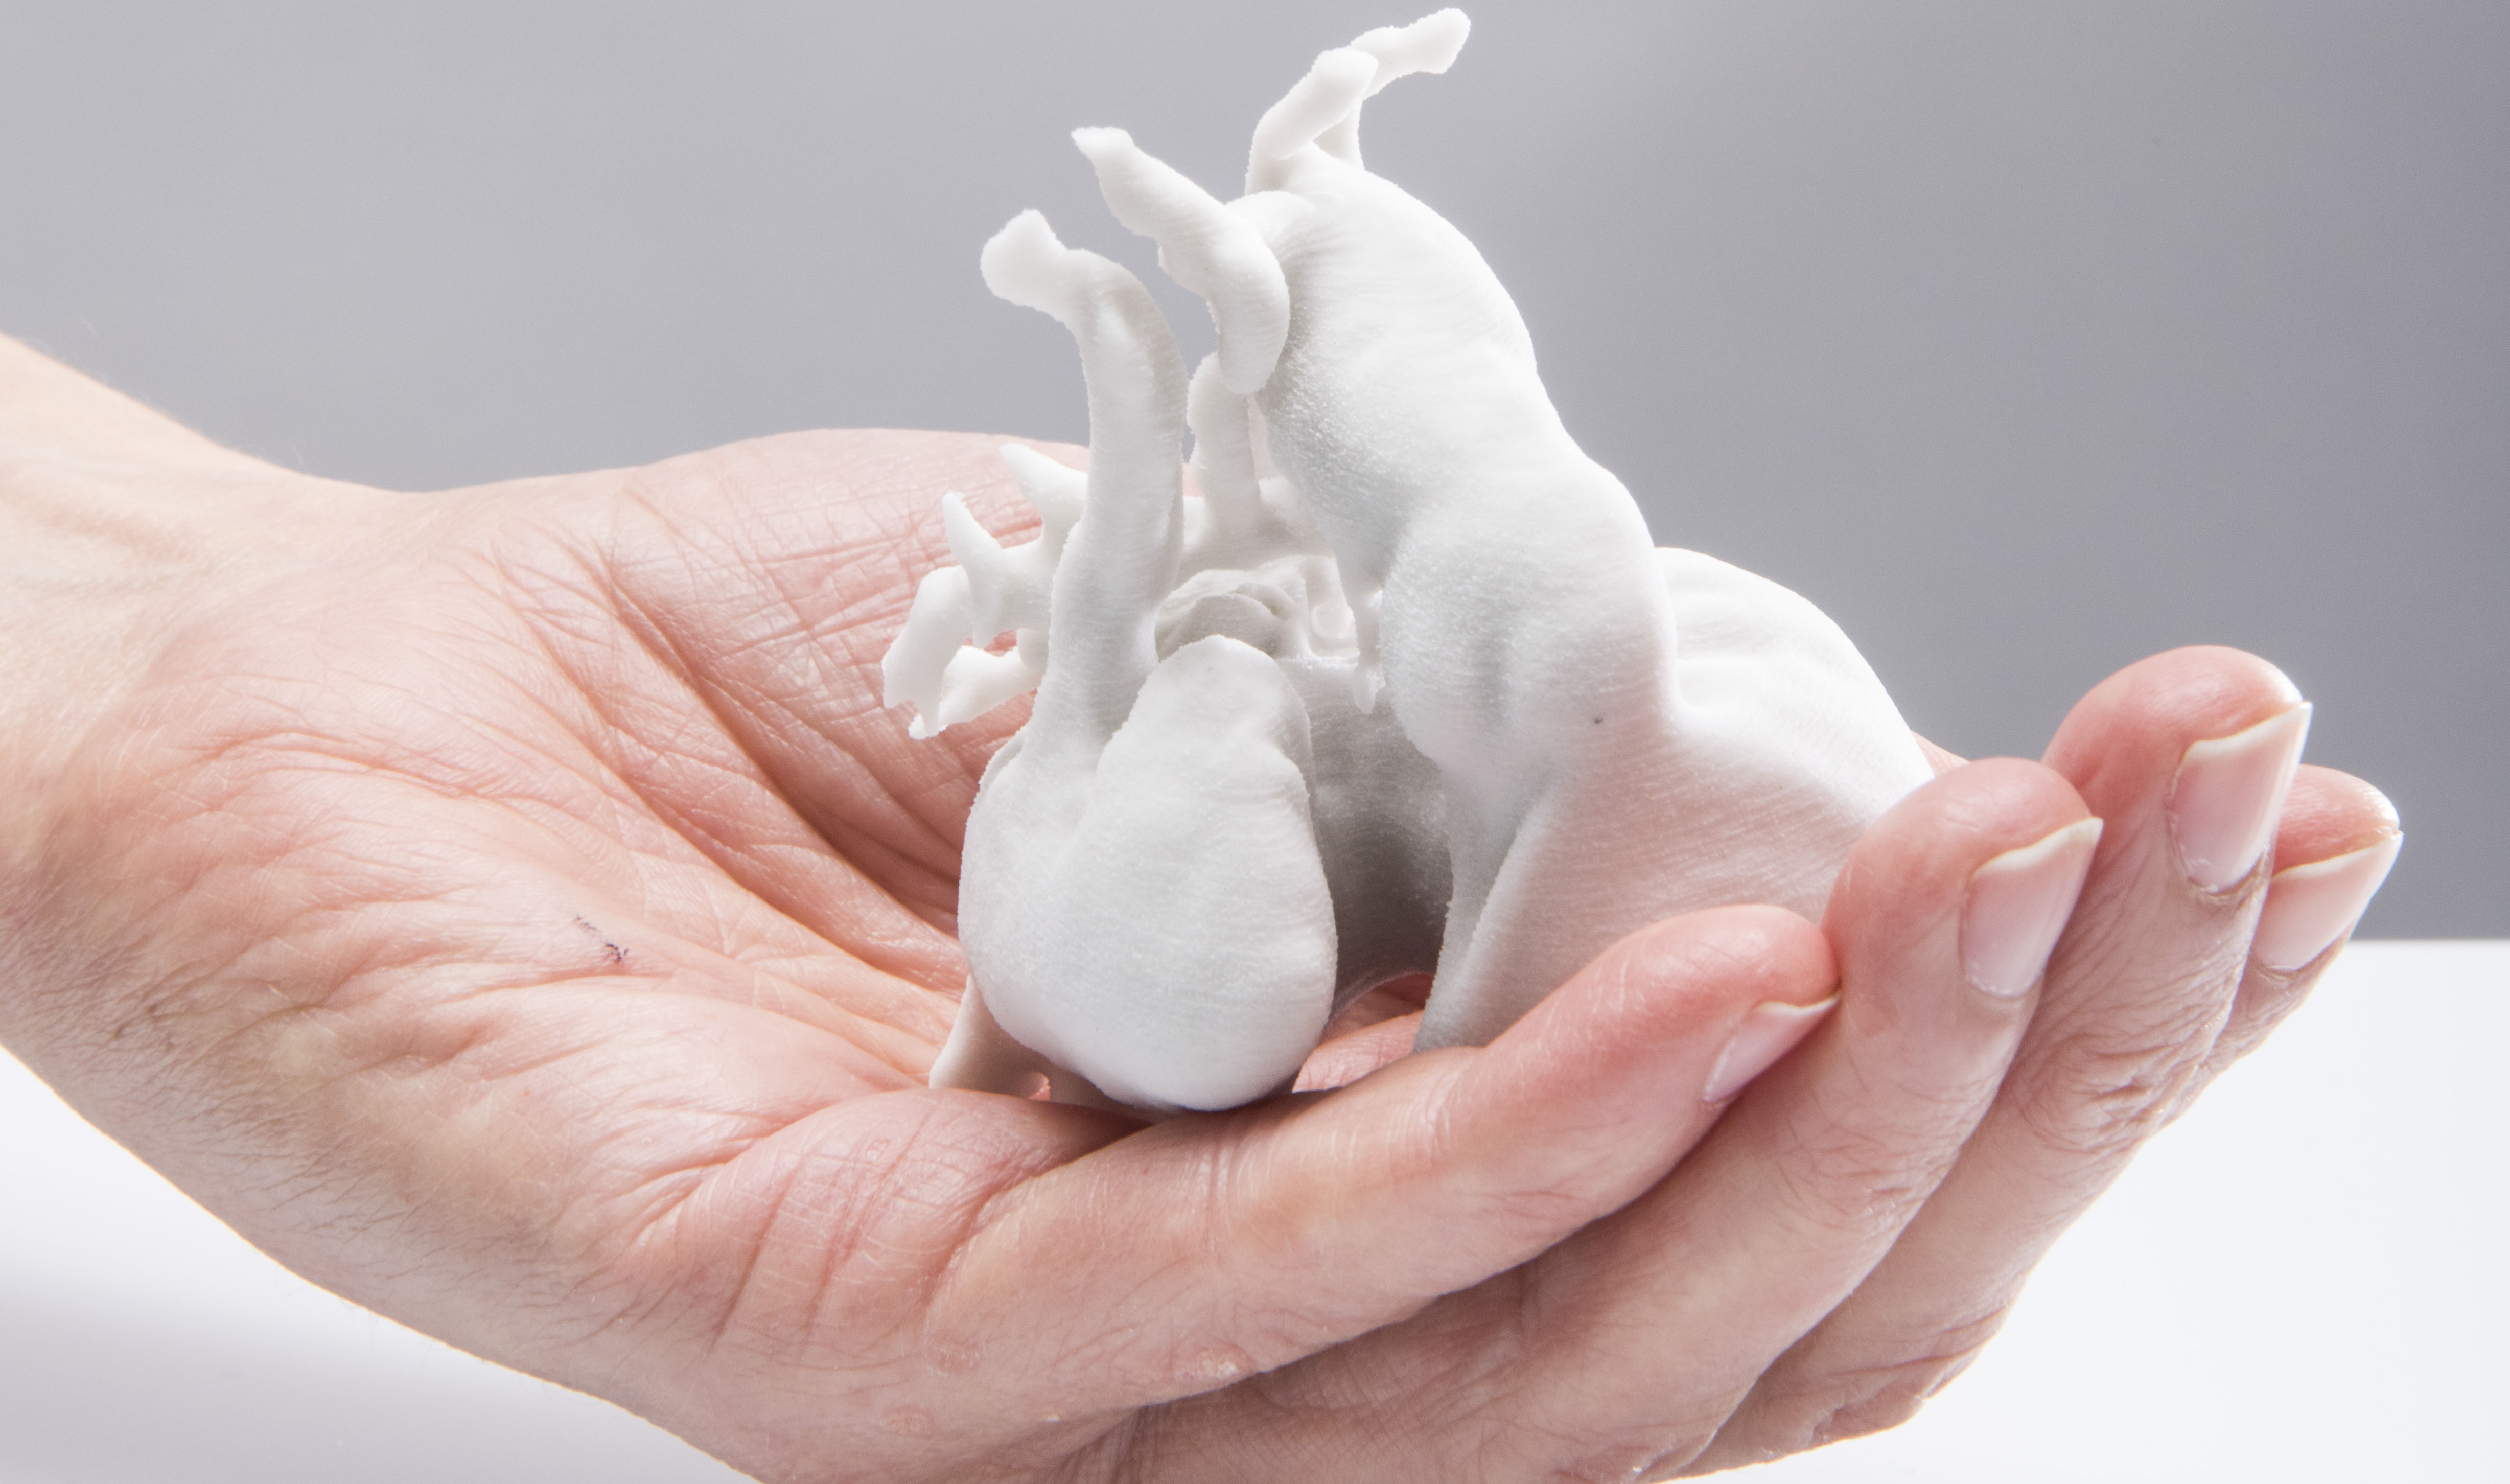 A hand holds a 3D printed model of a human heart